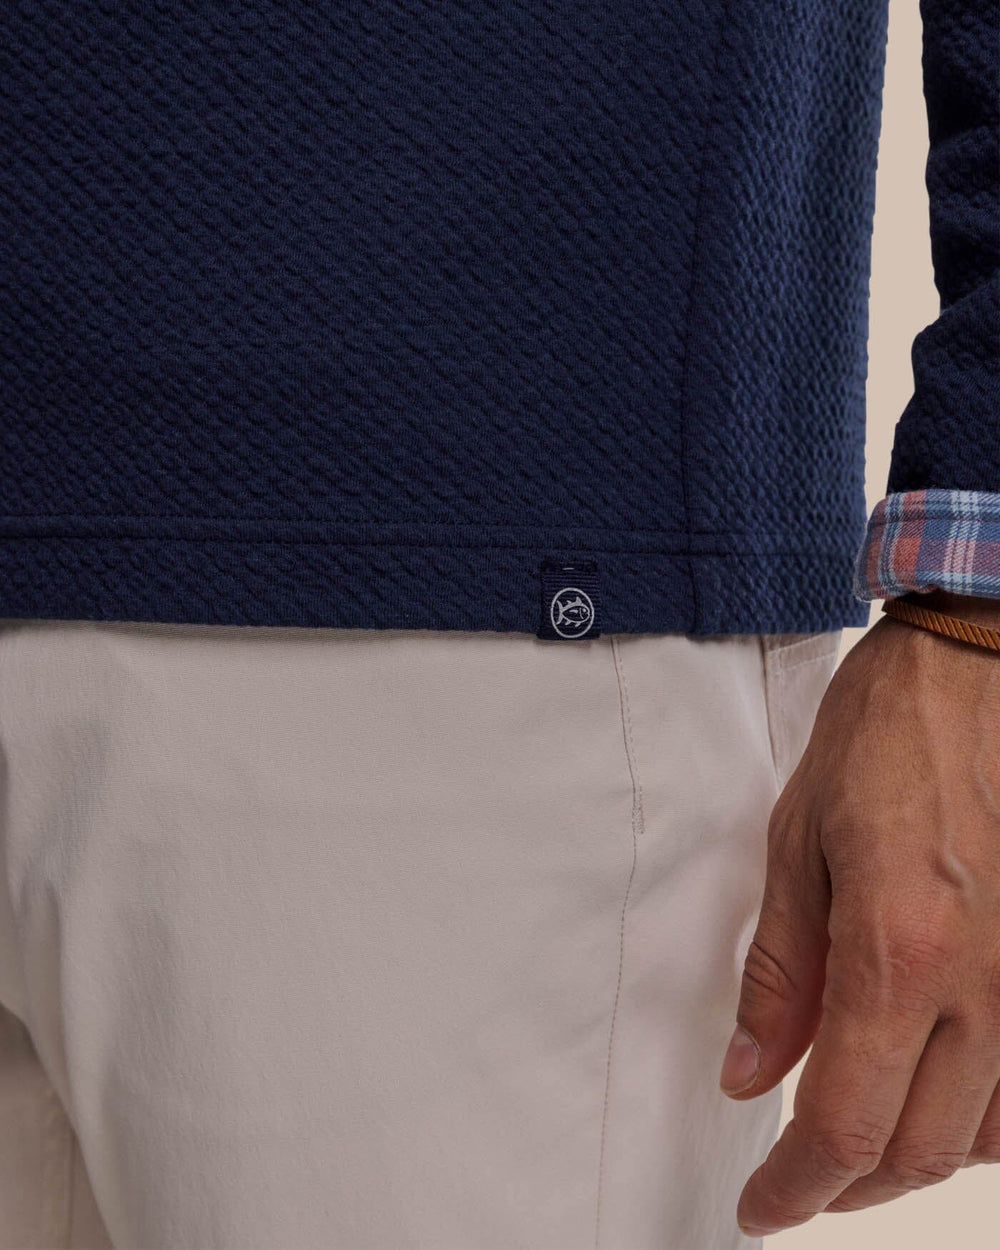 The detail view of the Southern Tide Heather Outbound Quarter Zip by Southern Tide - Heather True Navy